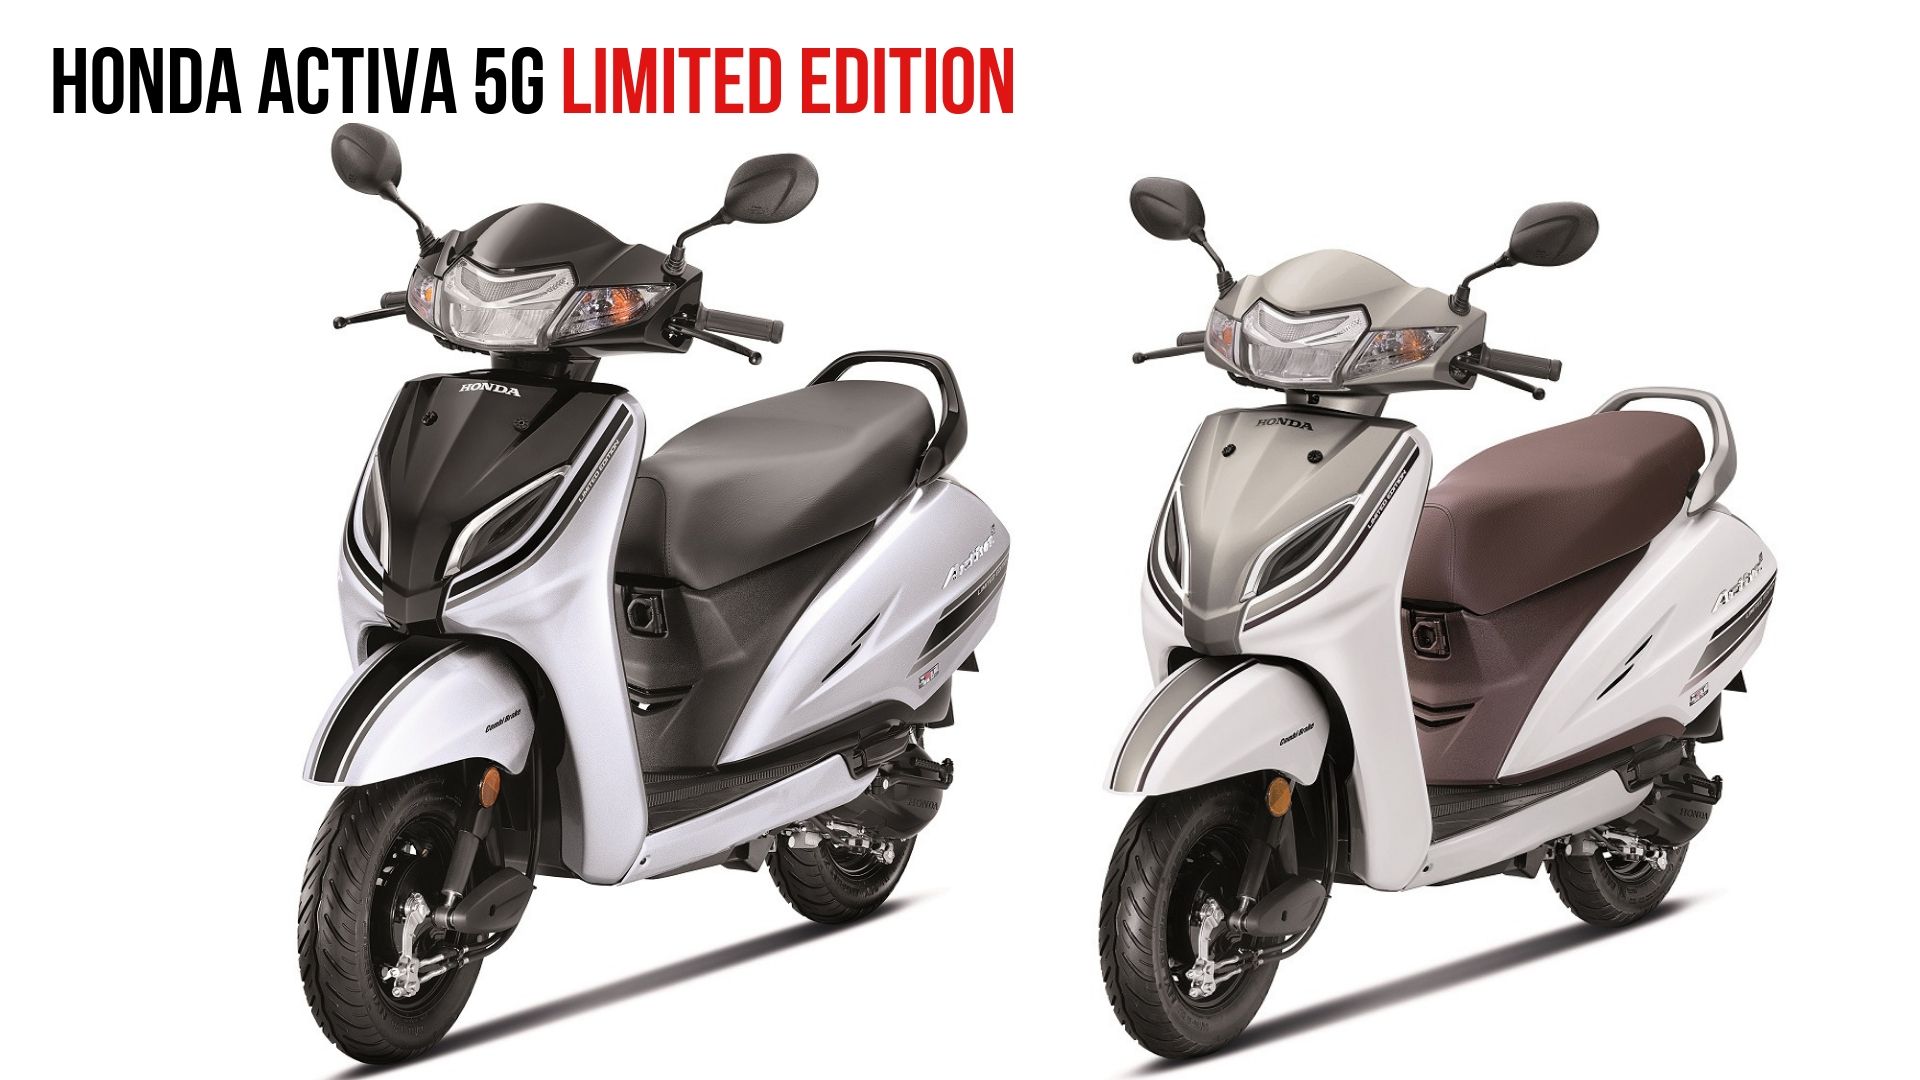 Honda Activa 5G Limited Edition Launched, Priced From Rs. 55,032